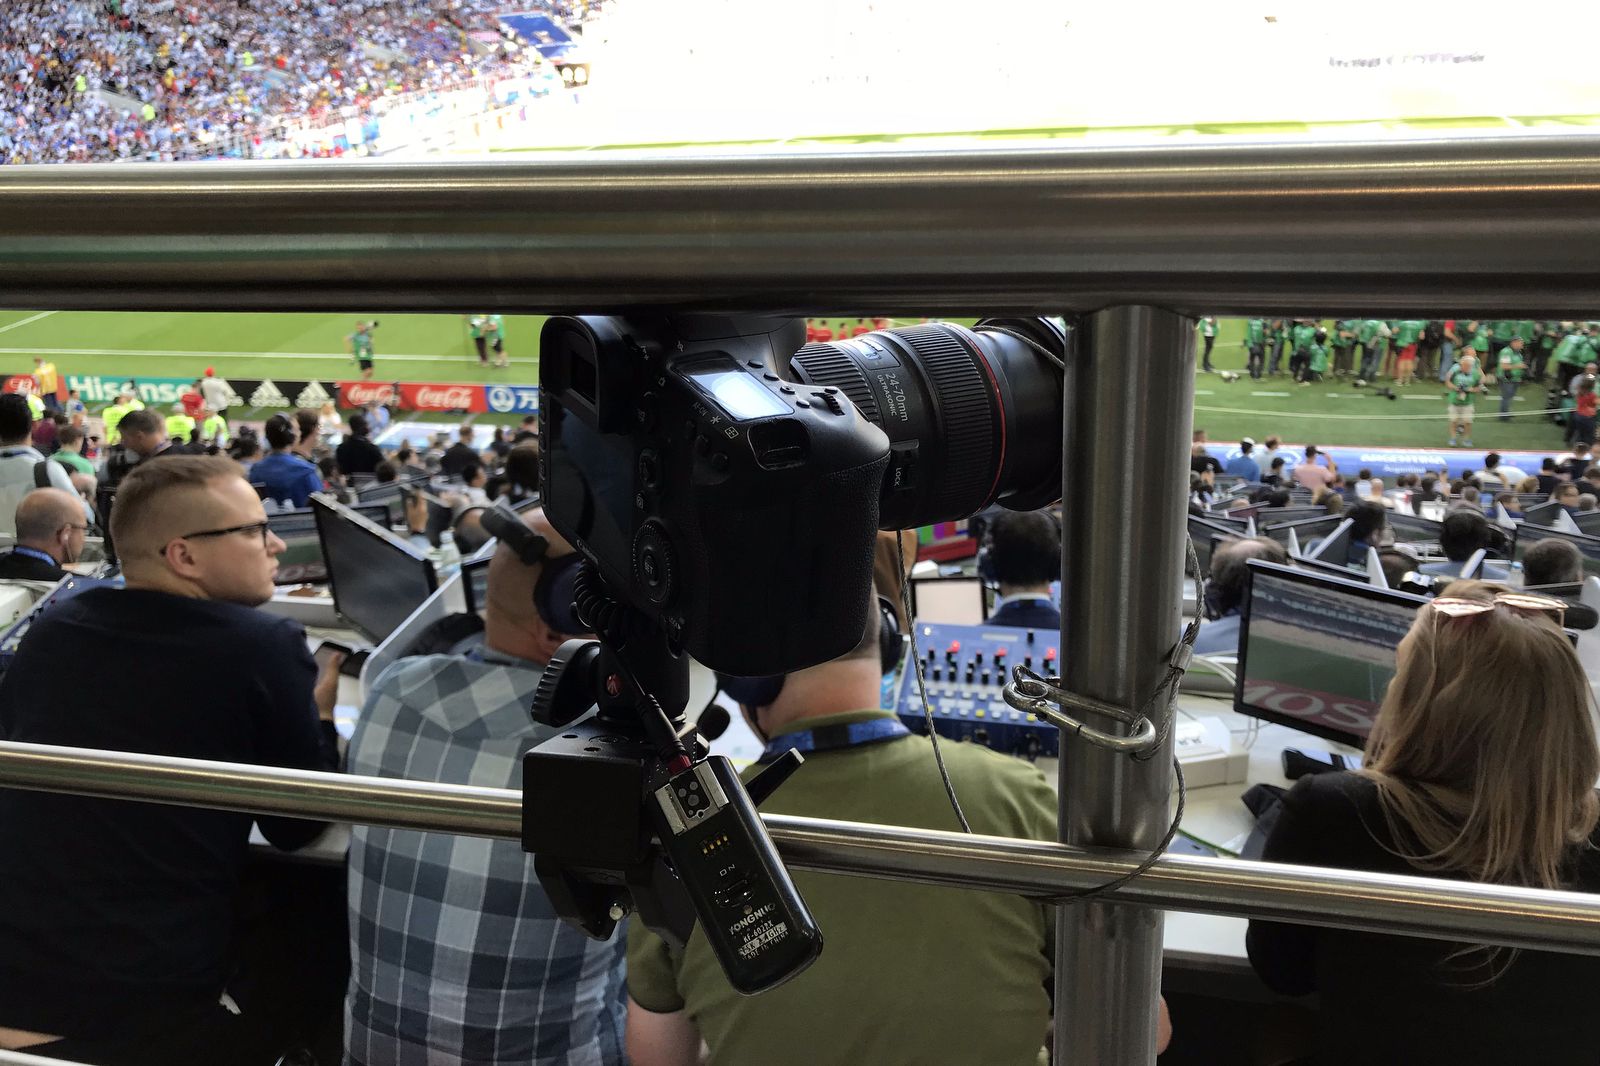 My remote camera clamped to the rail in front of me